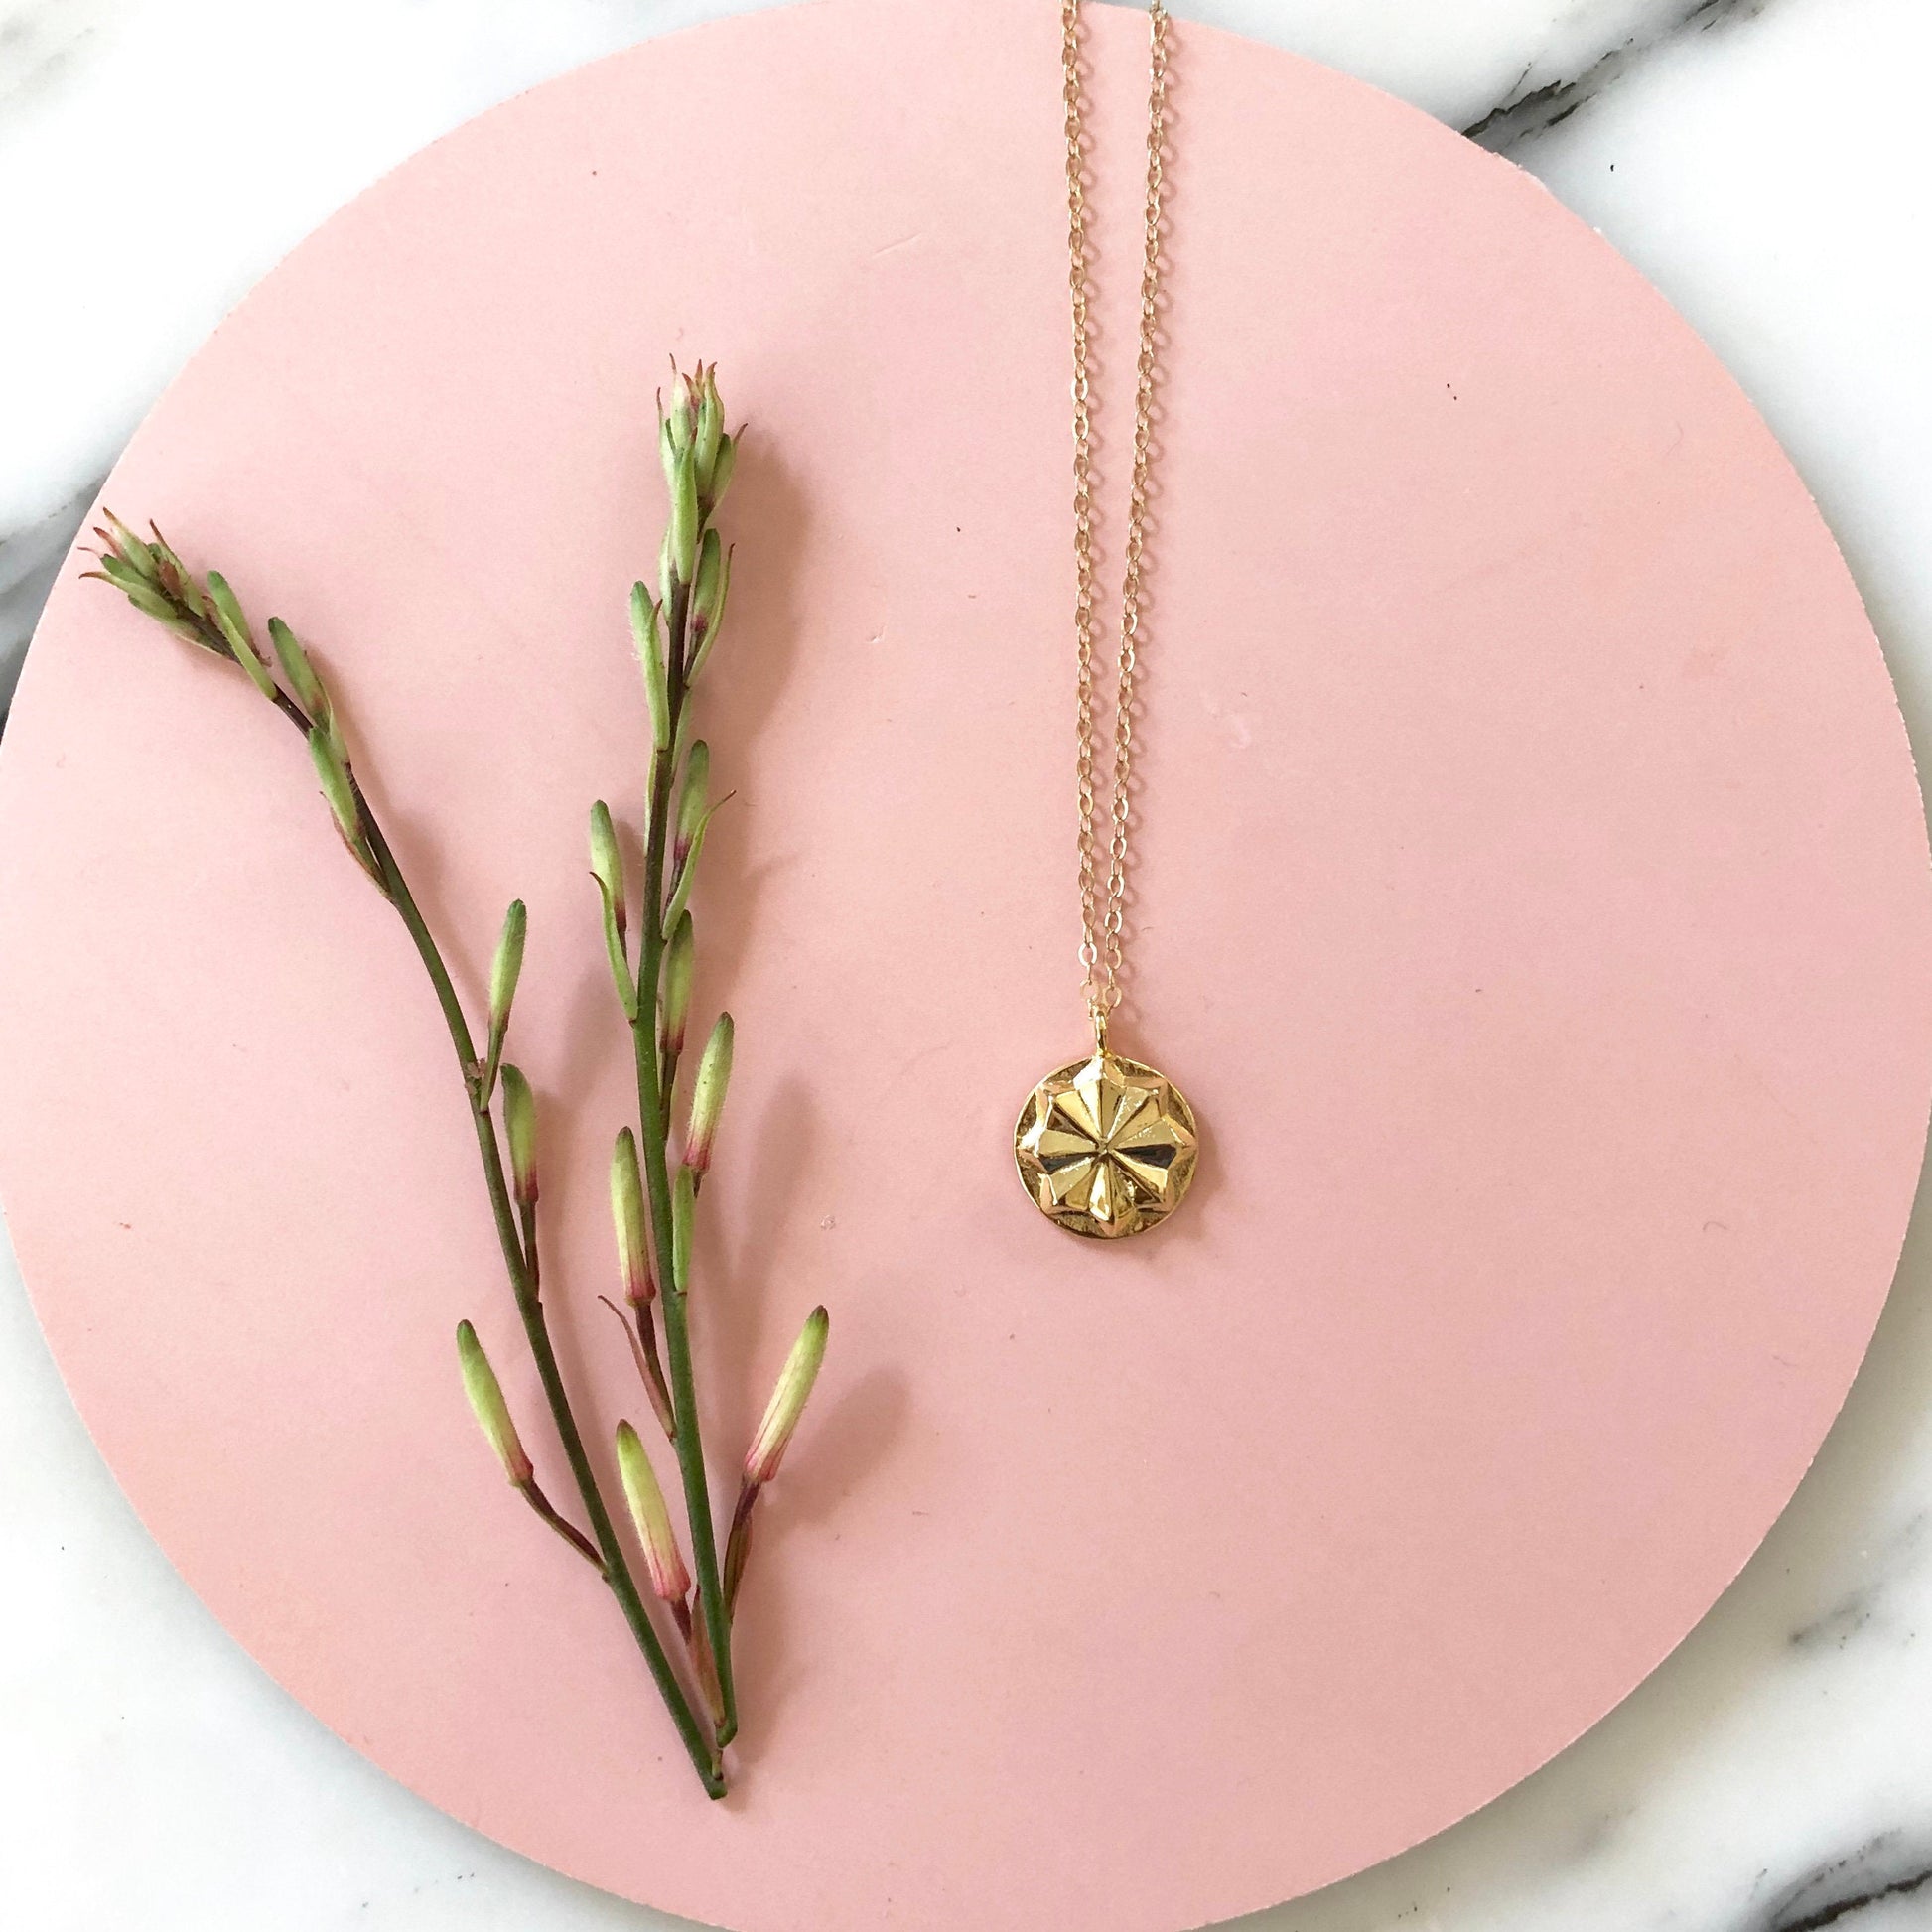 gold circular medallion necklace on a gold chain with pink circular background with greenery